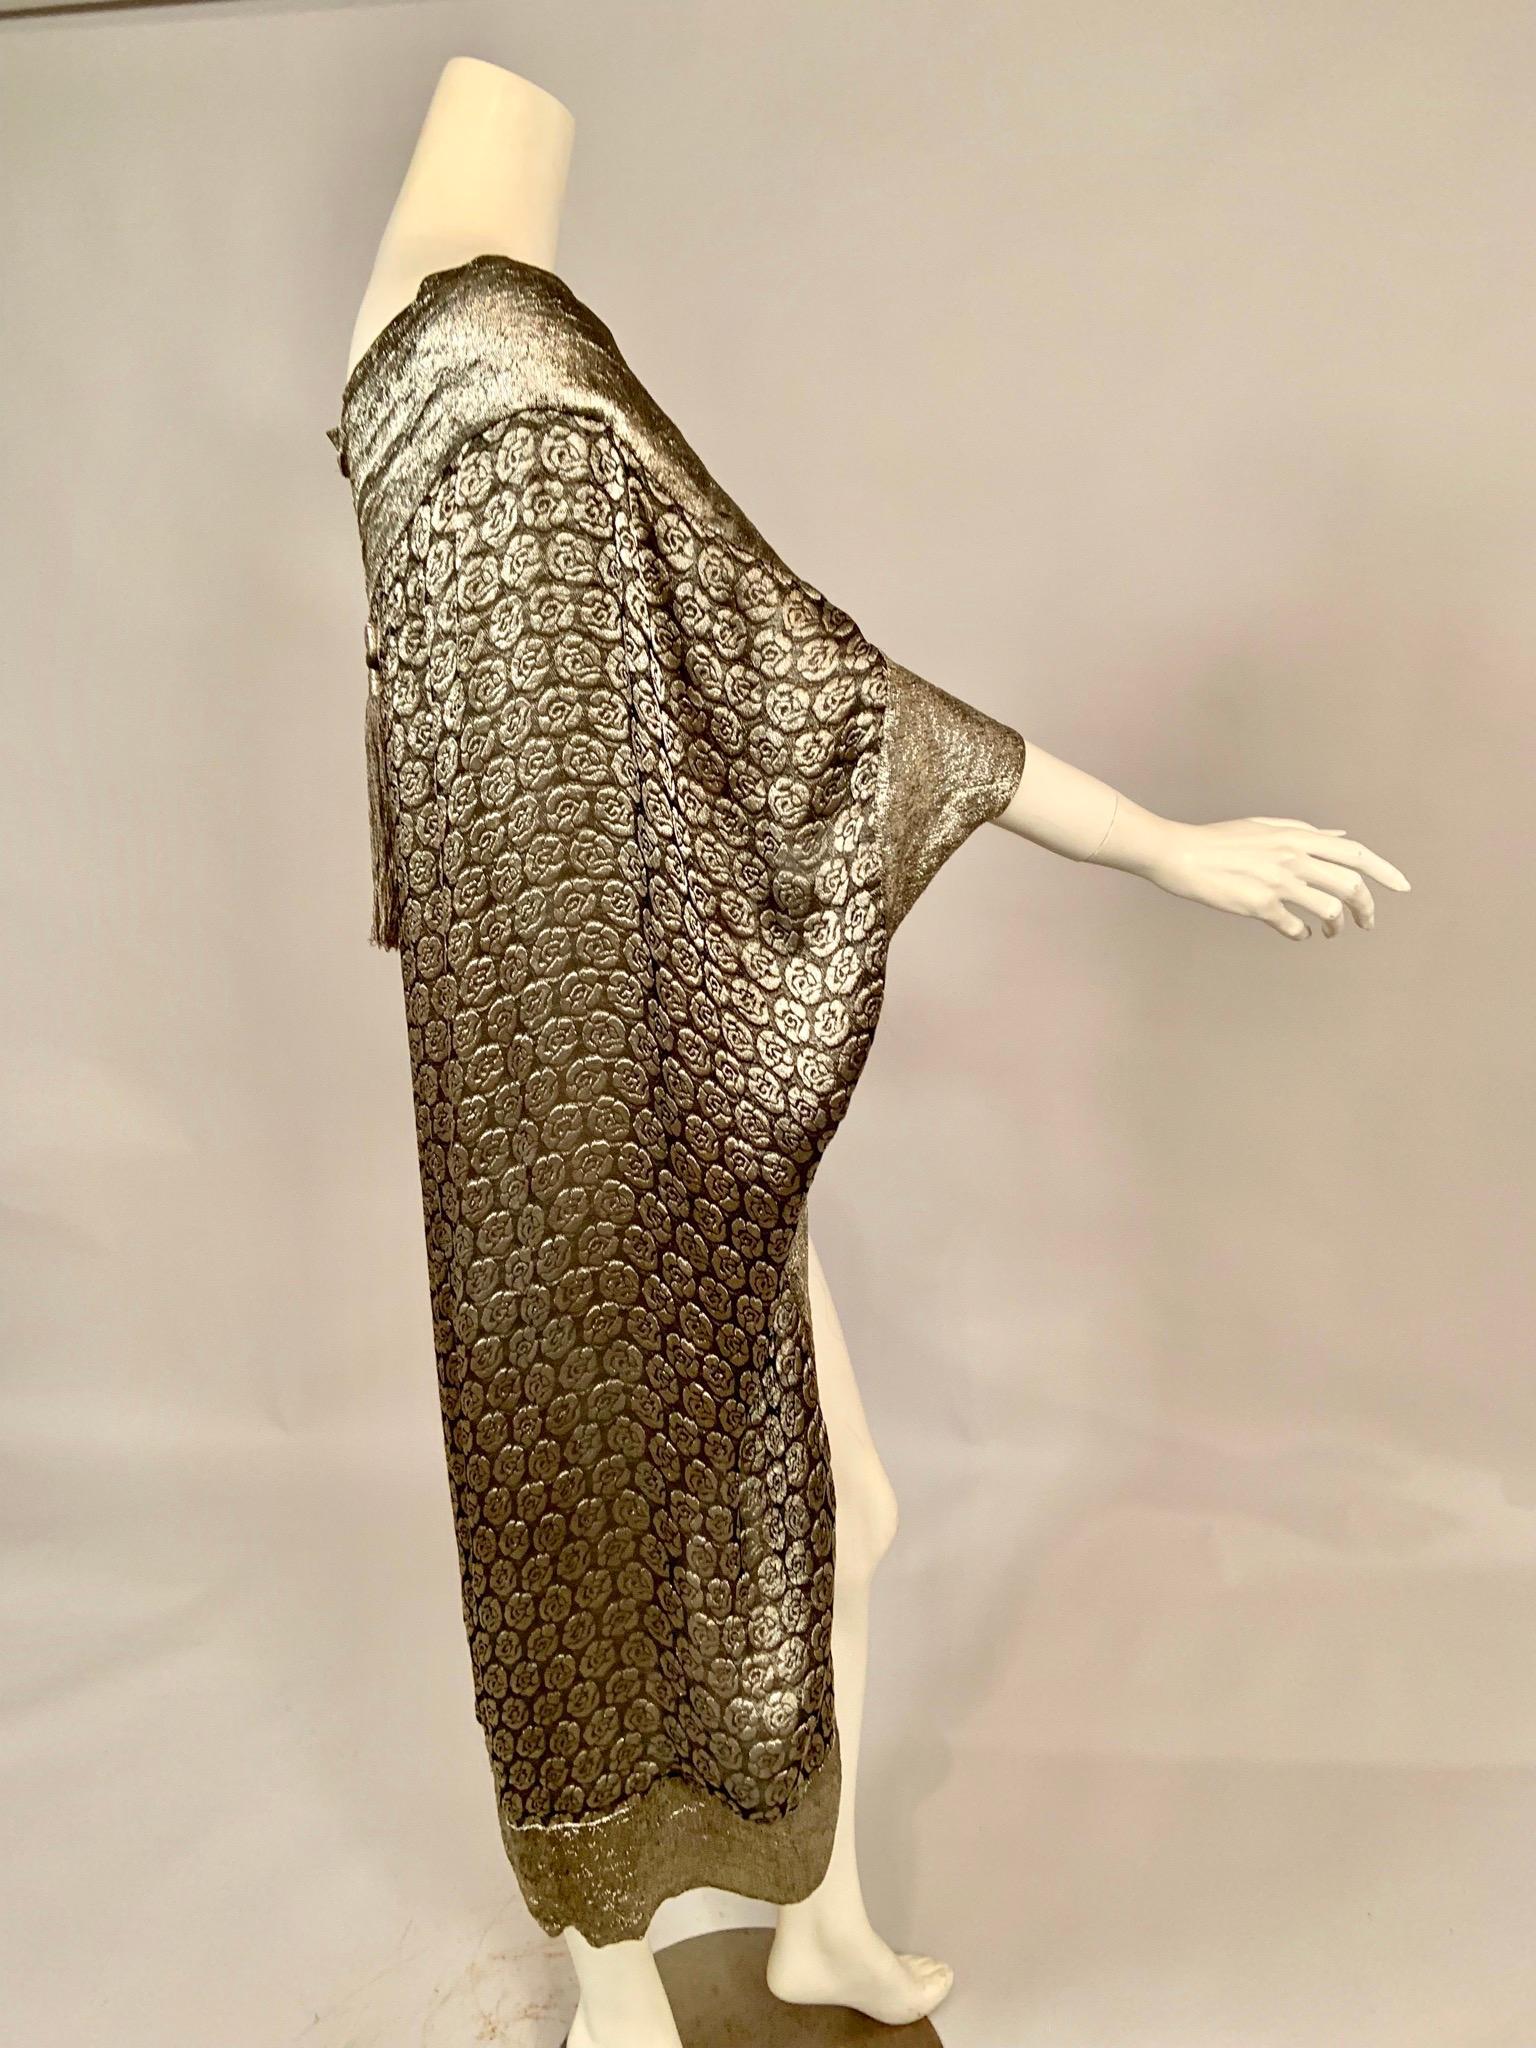 Liberty , Paris was a branch of the famous Liberty of London company, and this stunning piece was retailed by them at their Paris location. The garment can be worn as a cape, draped from the shoulder as a 1920's style cocoon with the sleeves